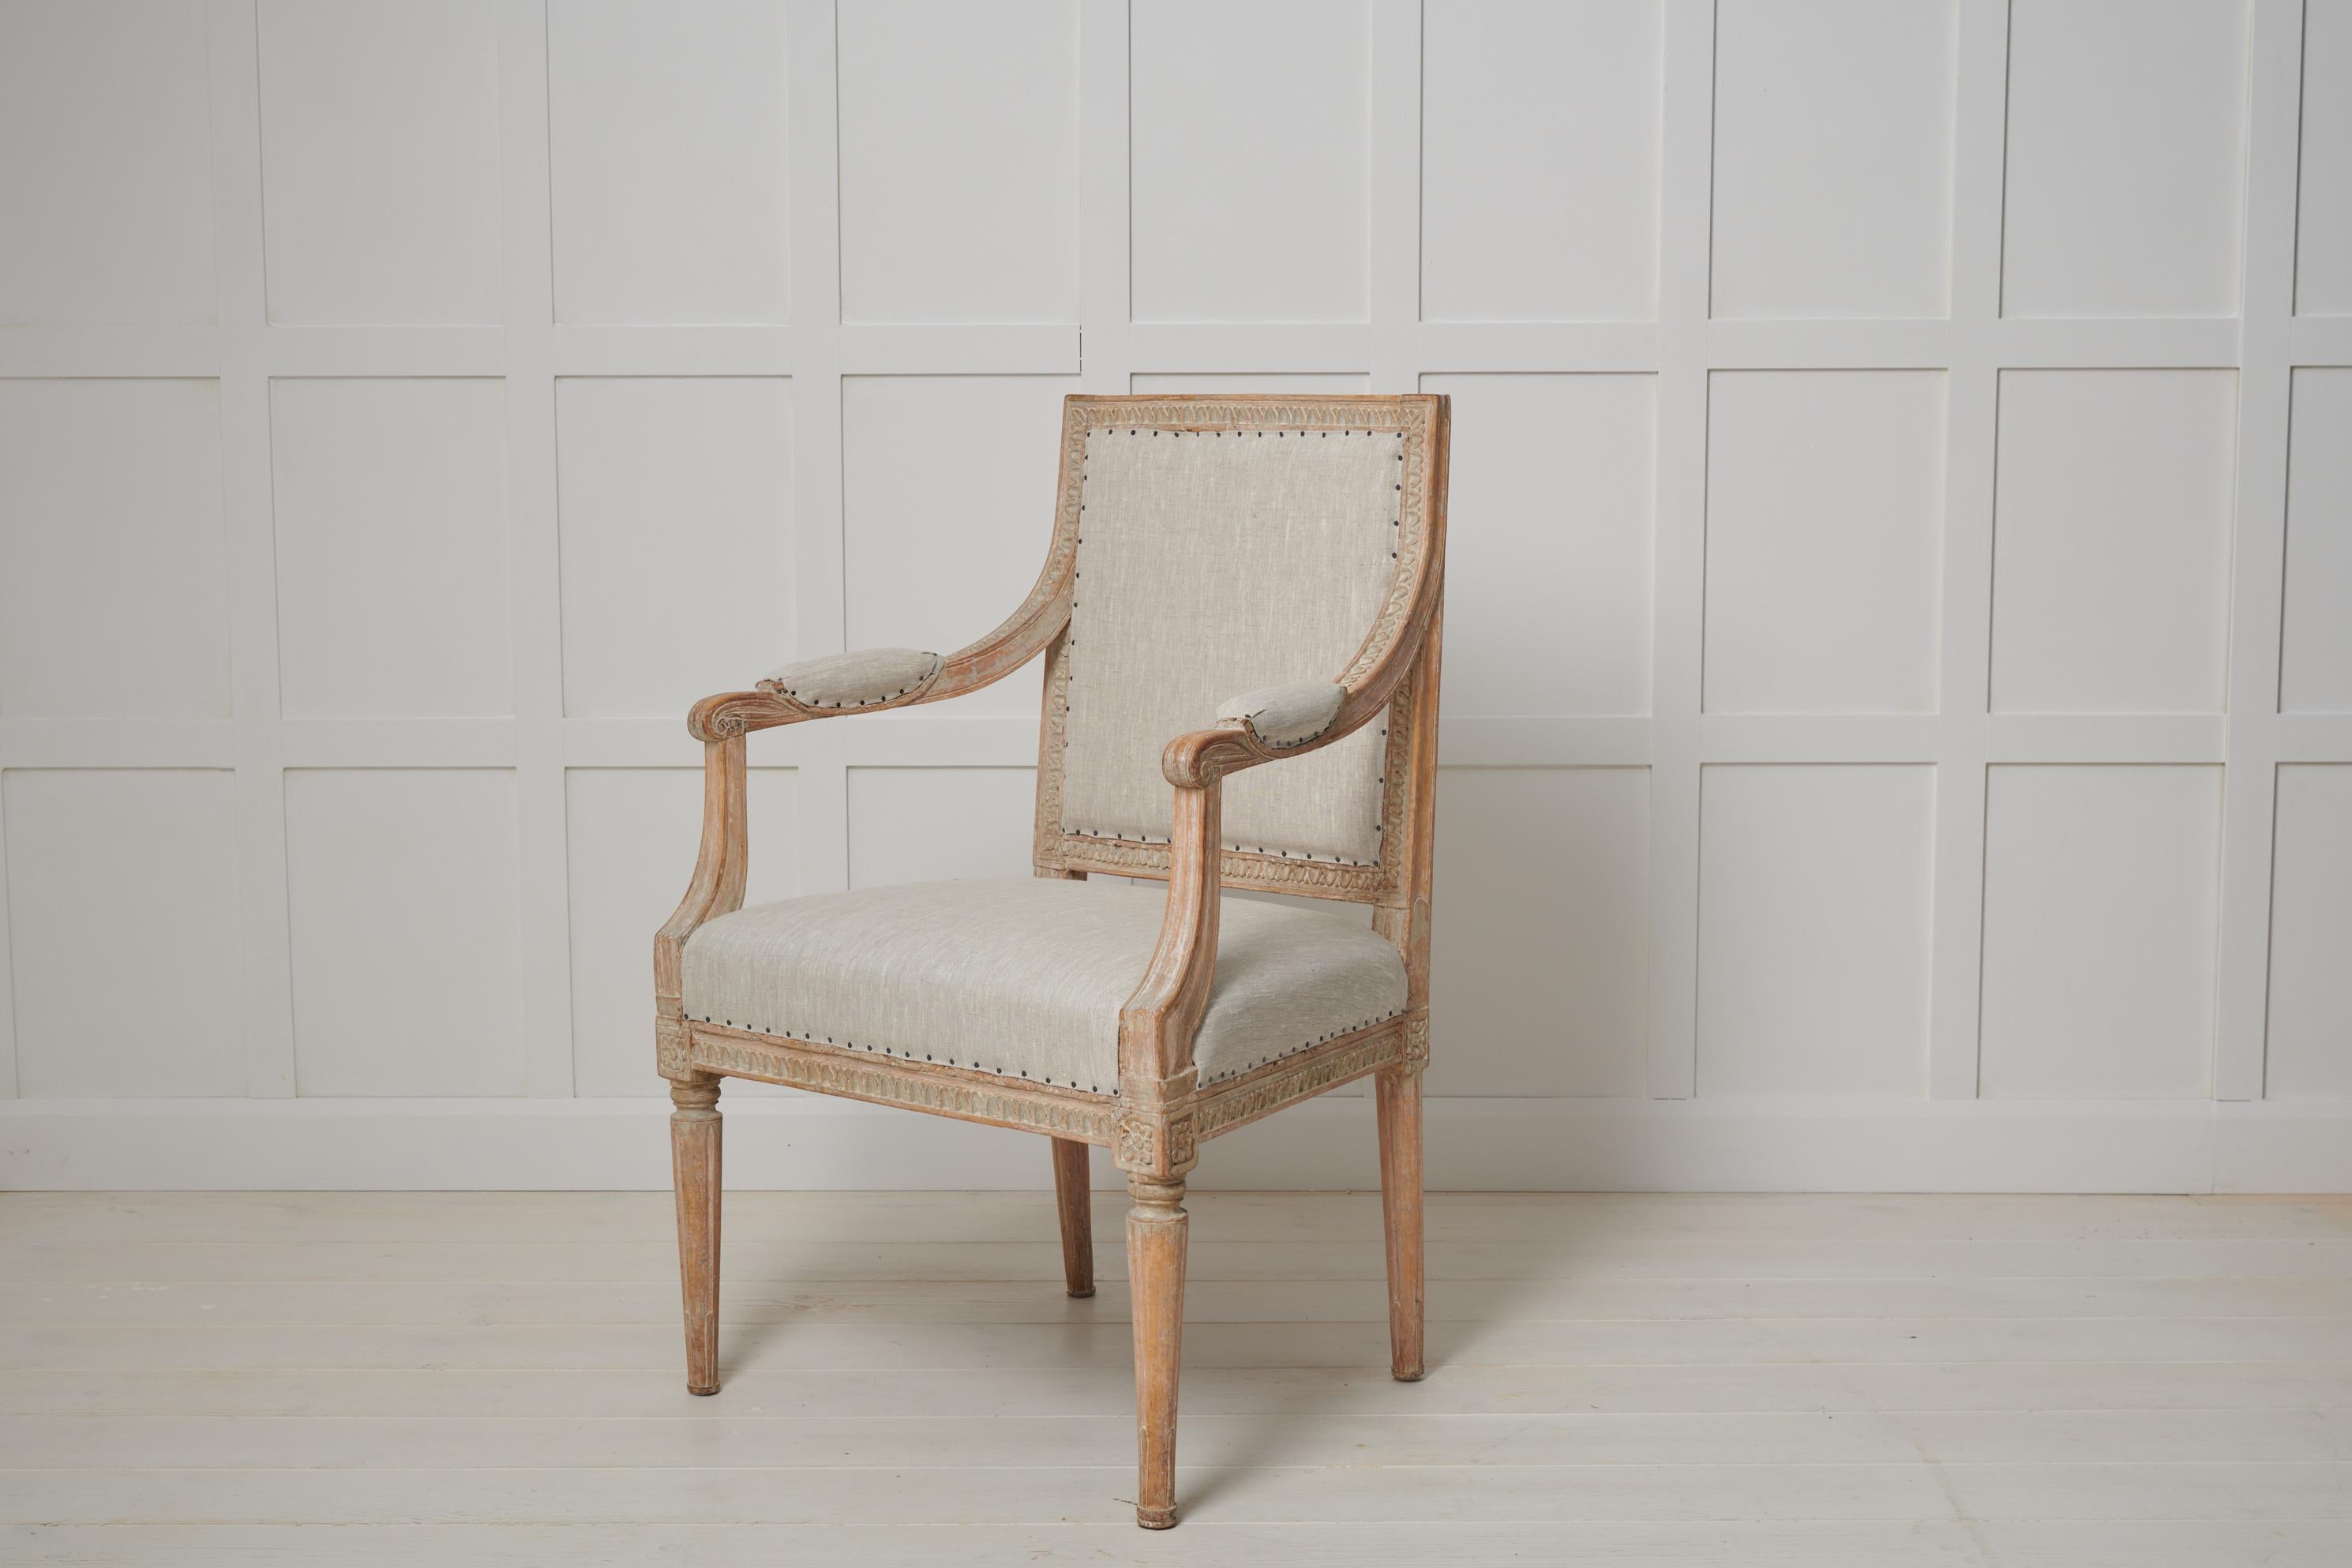 Swedish gustavian upholstered armchair from the late 18th century, circa 1790. The armchair has a straight shape with hand carved wooden decorations all over the chair. The decor spans around the backrest, down the armrest and around the seat